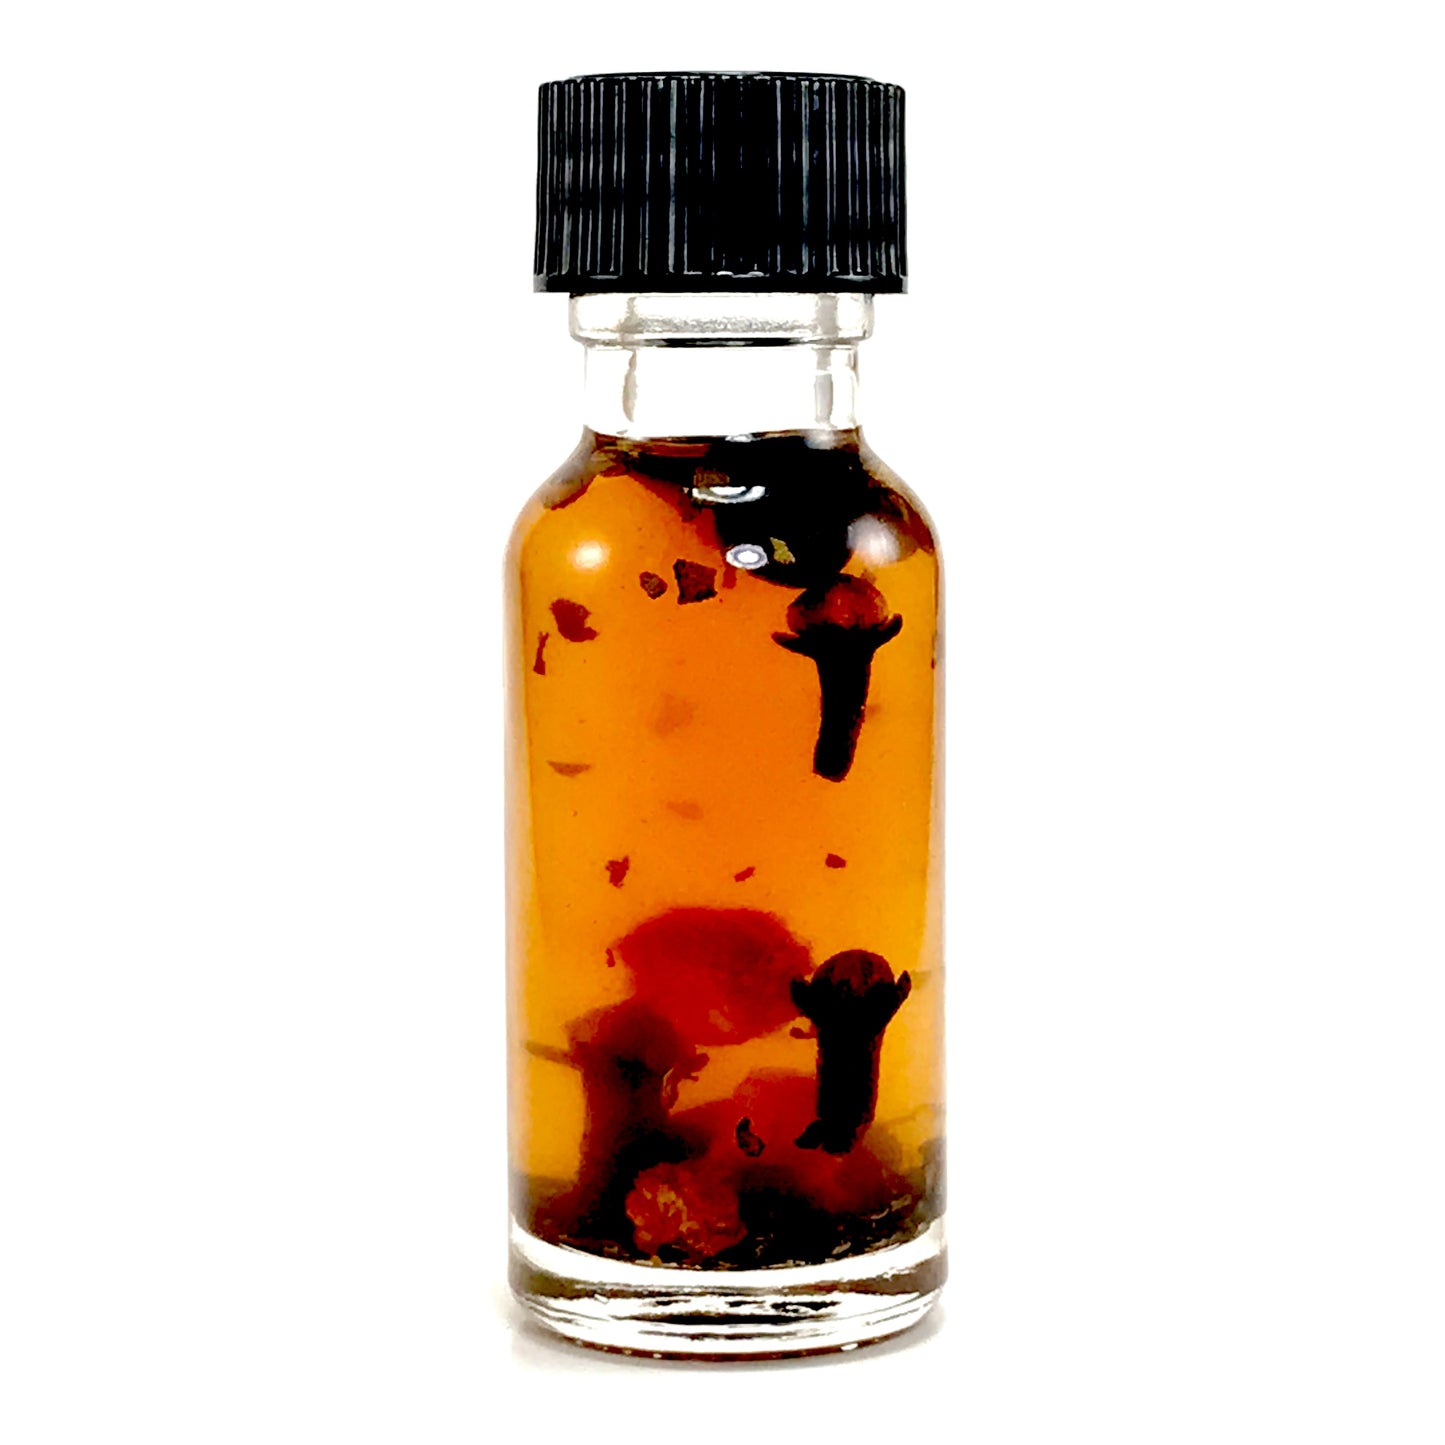 Fire Elemental Oil for transformation, rituals, hoodoo, wicca, pagan